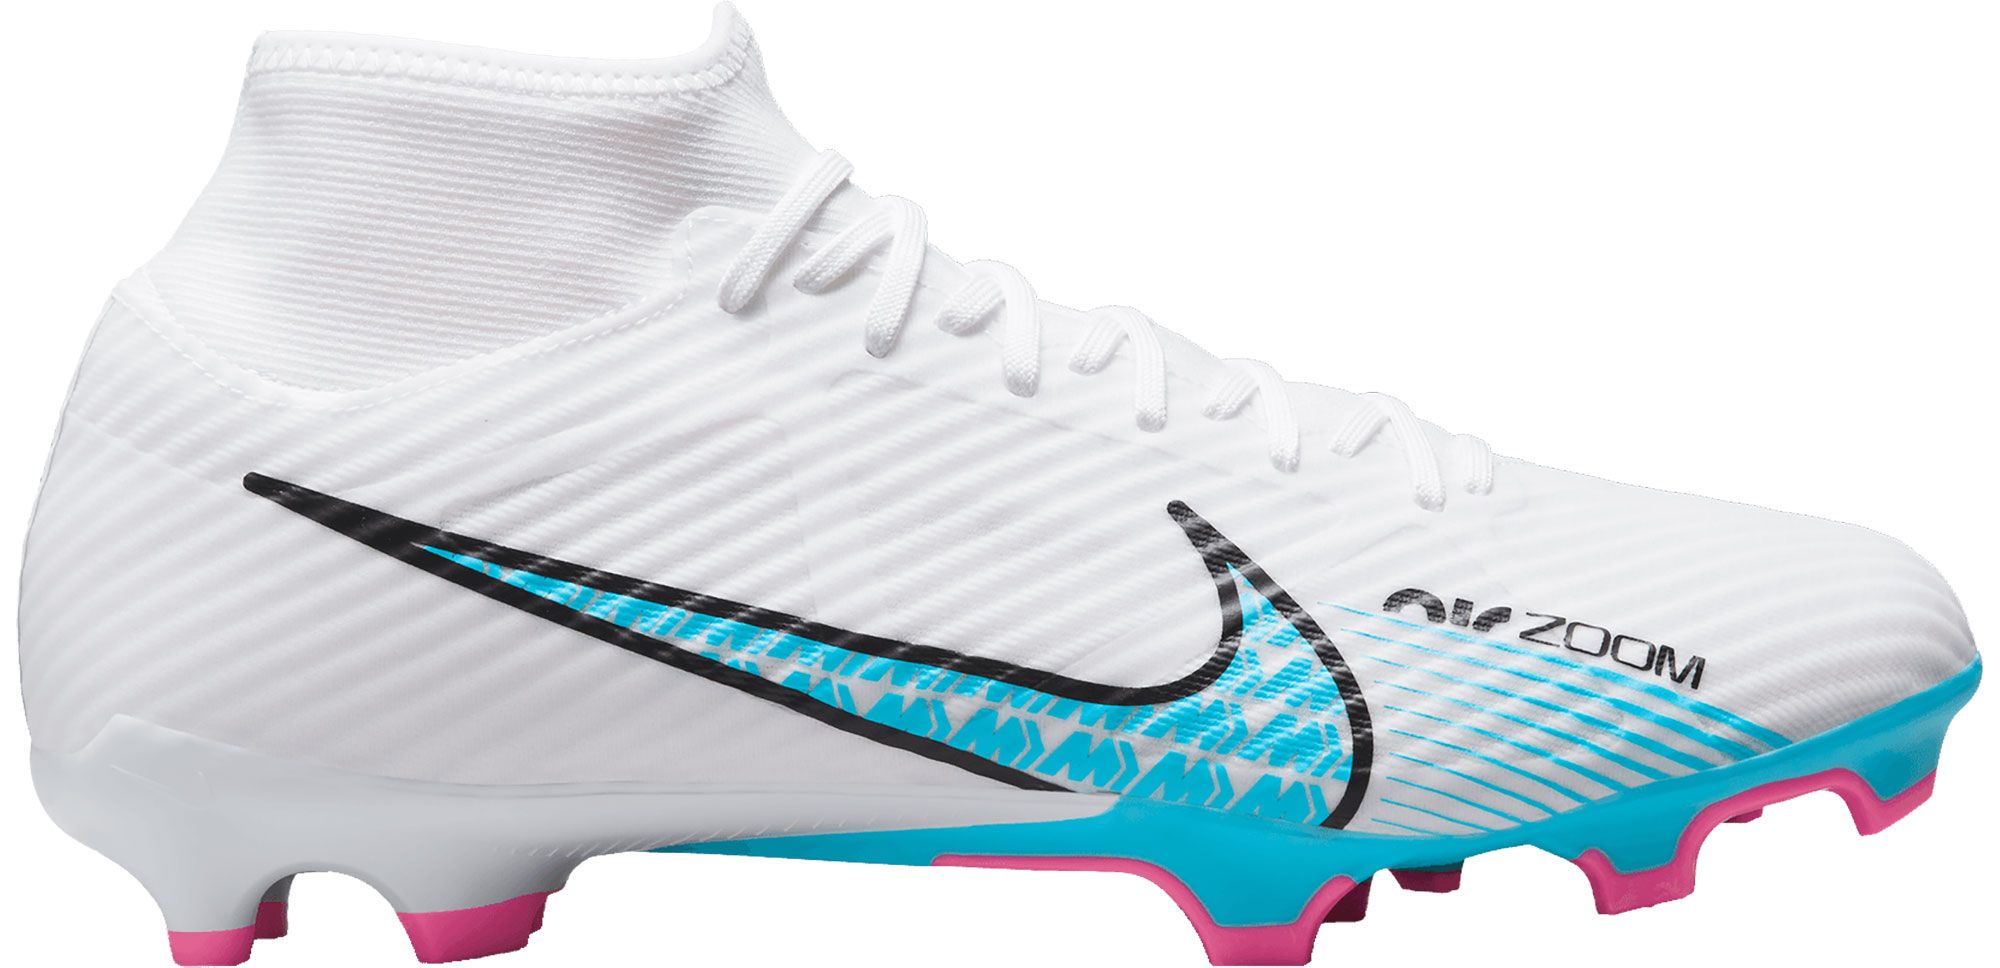 Nike Air Mercurial Superfly 9 Academy FG/MG Soccer Cleat - White/Blue/Pink/Indigo/Black – Soccer Zone USA